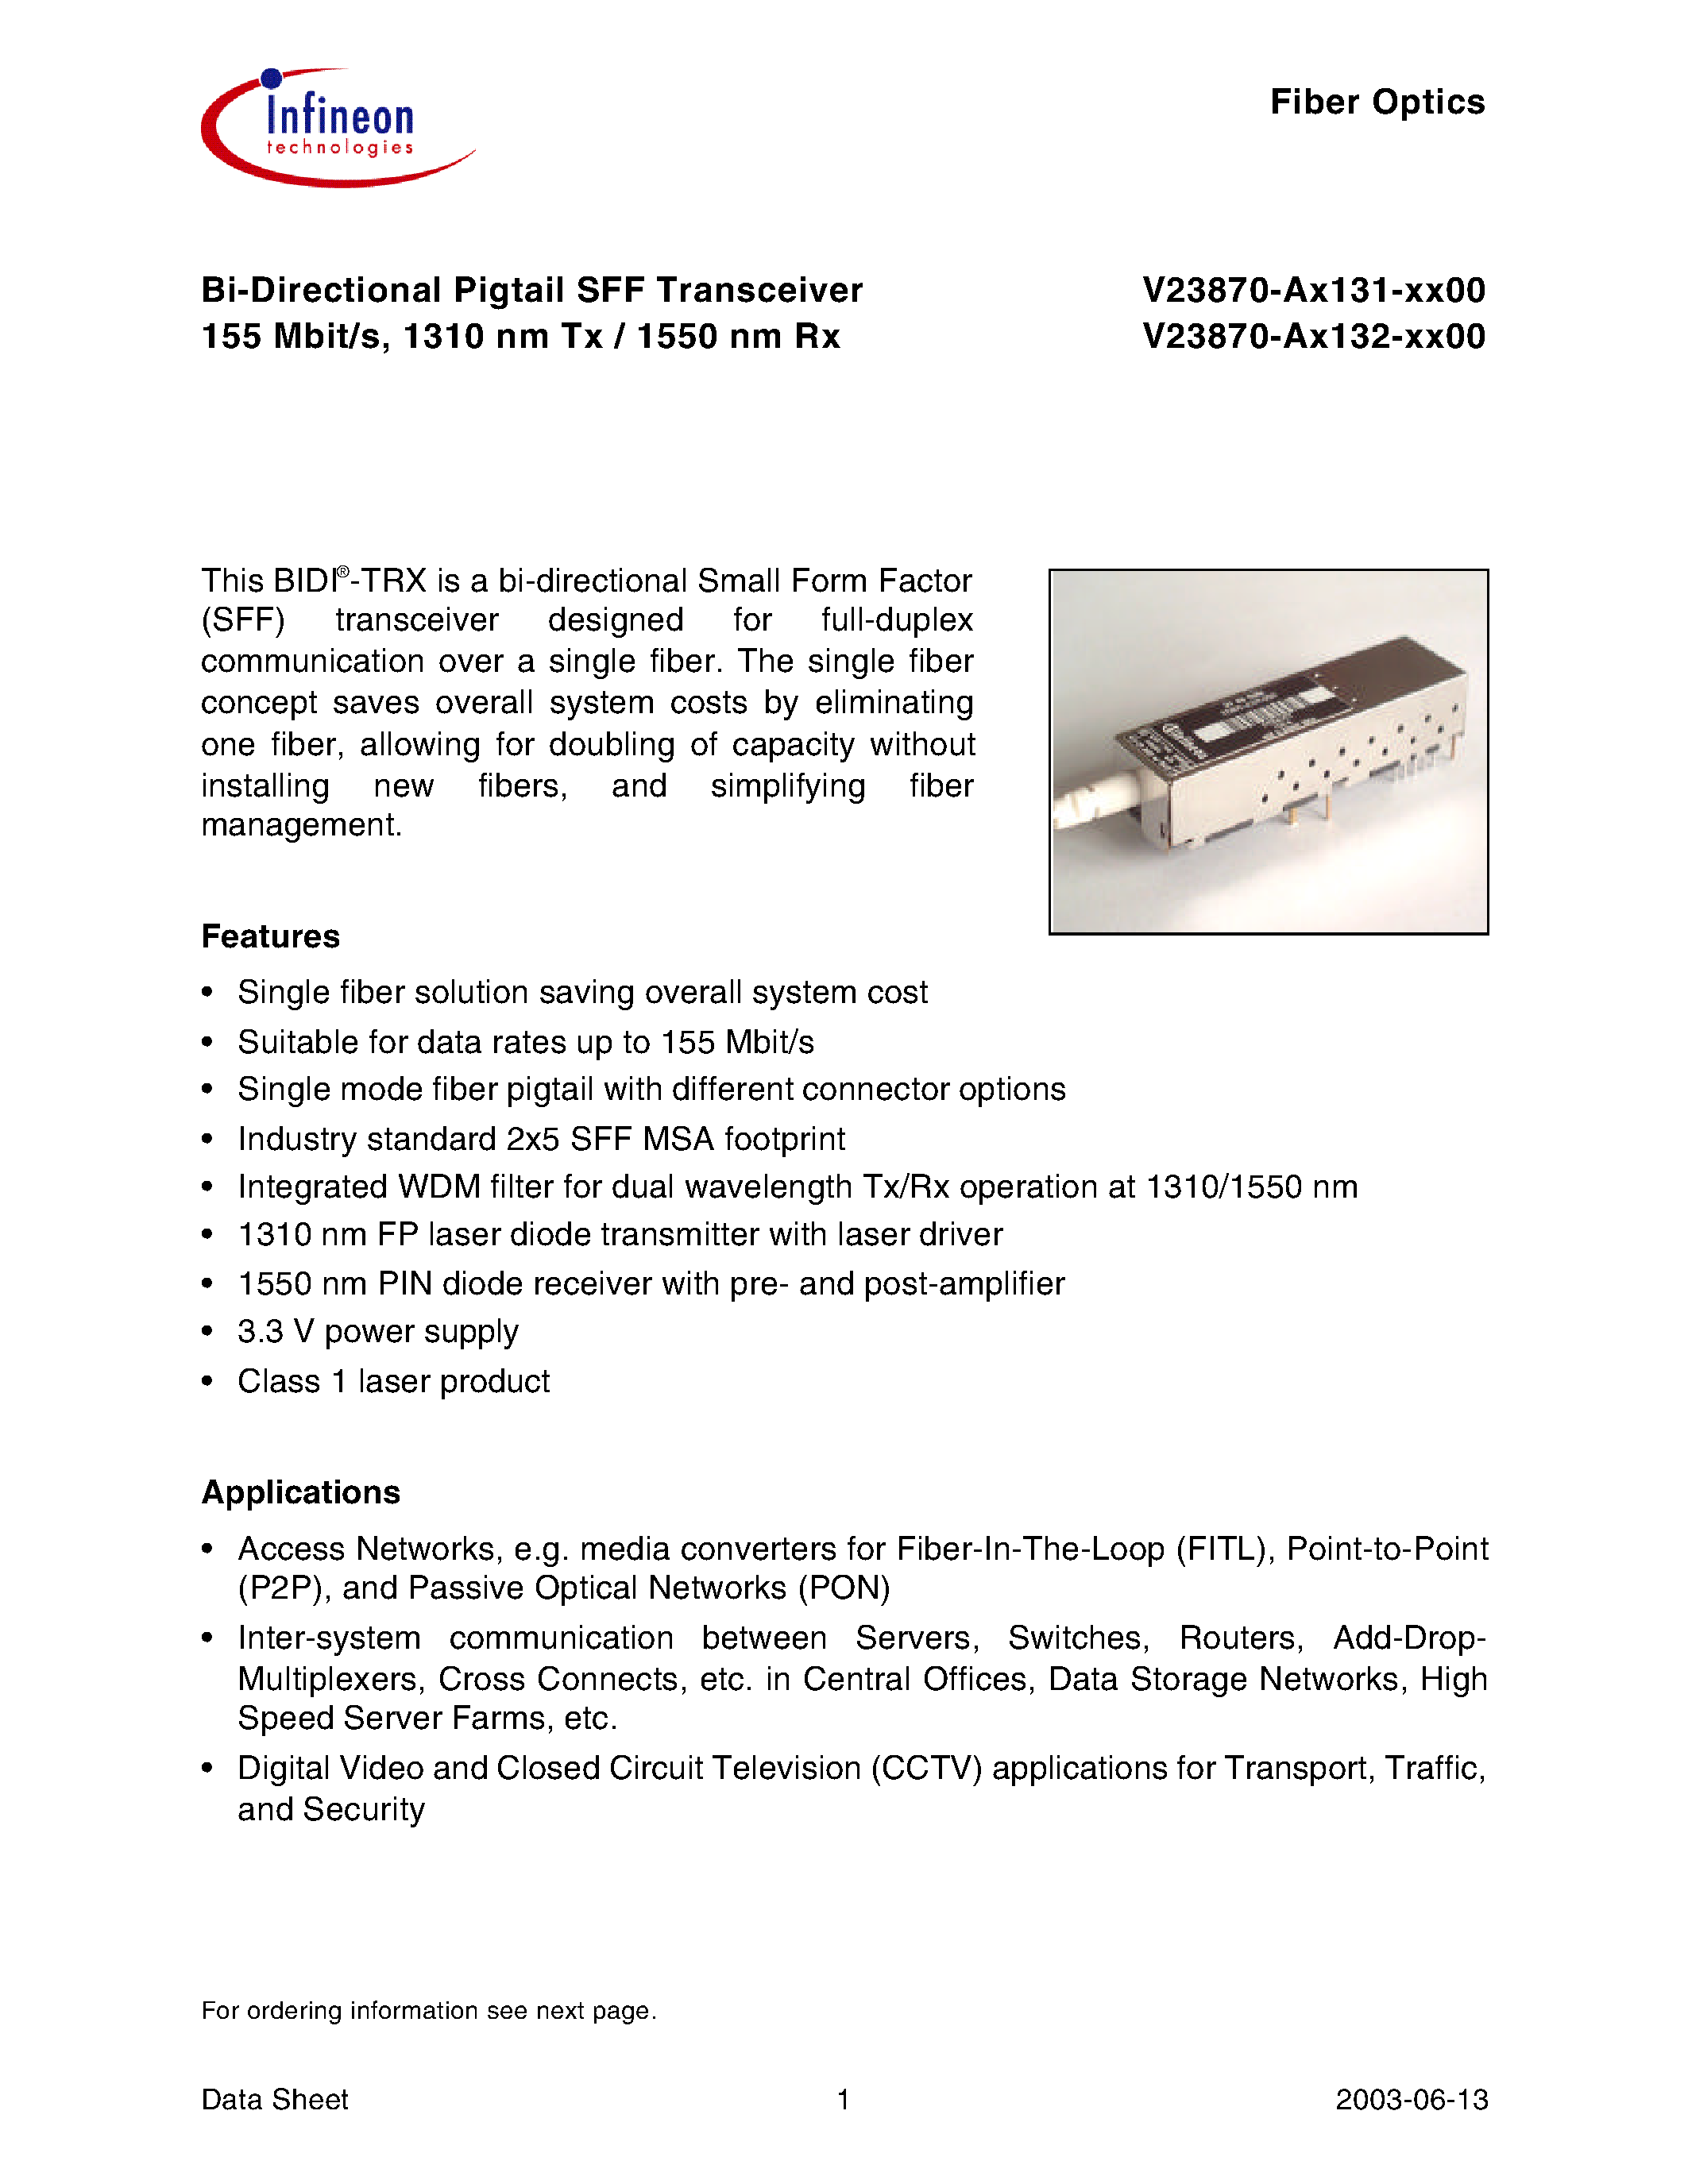 Datasheet V23870-A1132-A600 - Bi-Directional Pigtail SFF Transceiver 155 Mbit/s/ 1310 nm Tx / 1550 nm Rx page 1